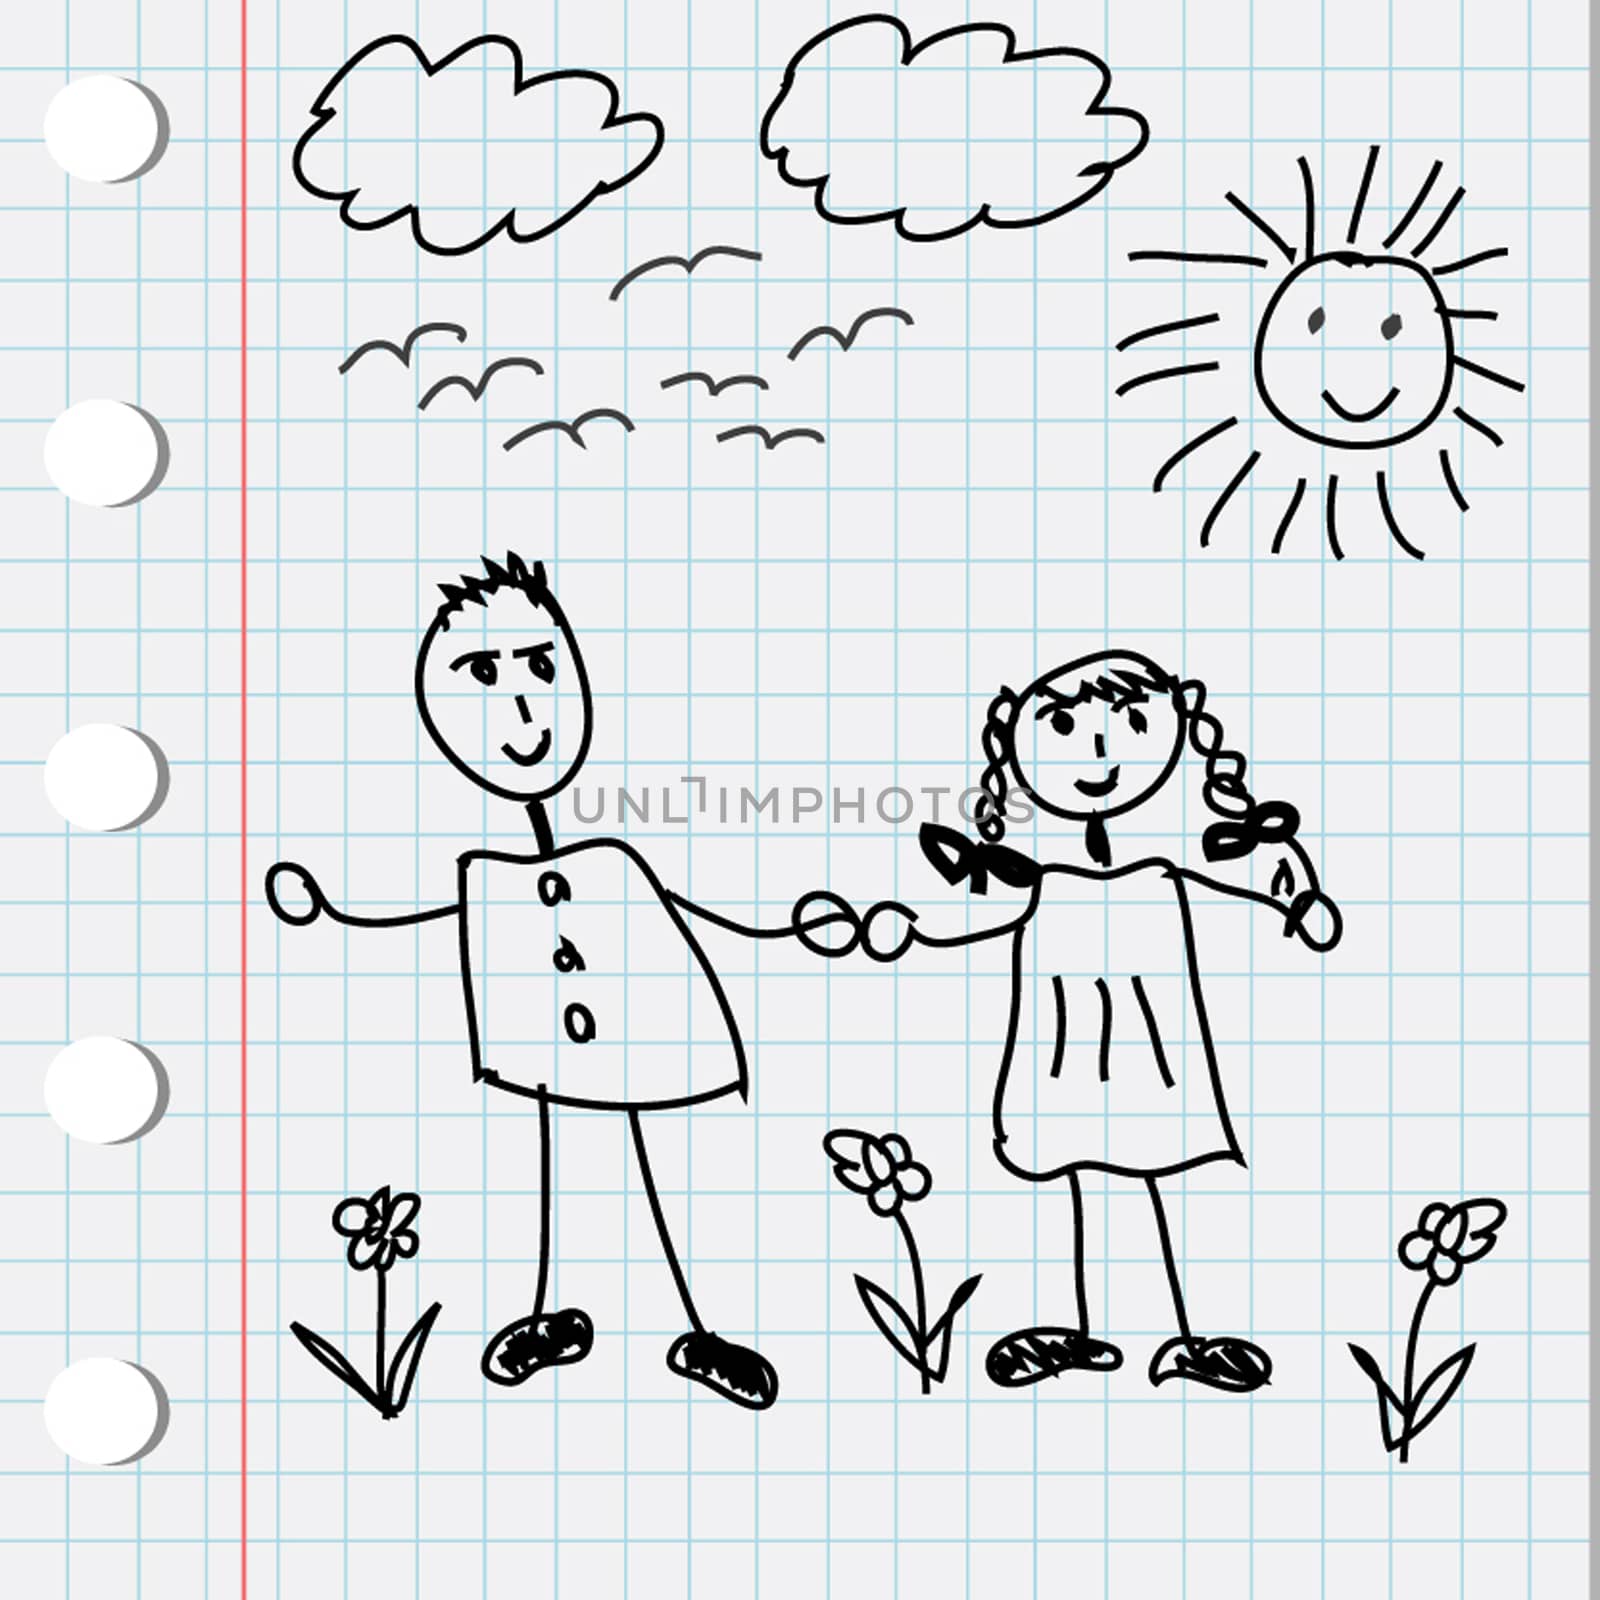 Cartoon doodle illustration of boy and girl on math page